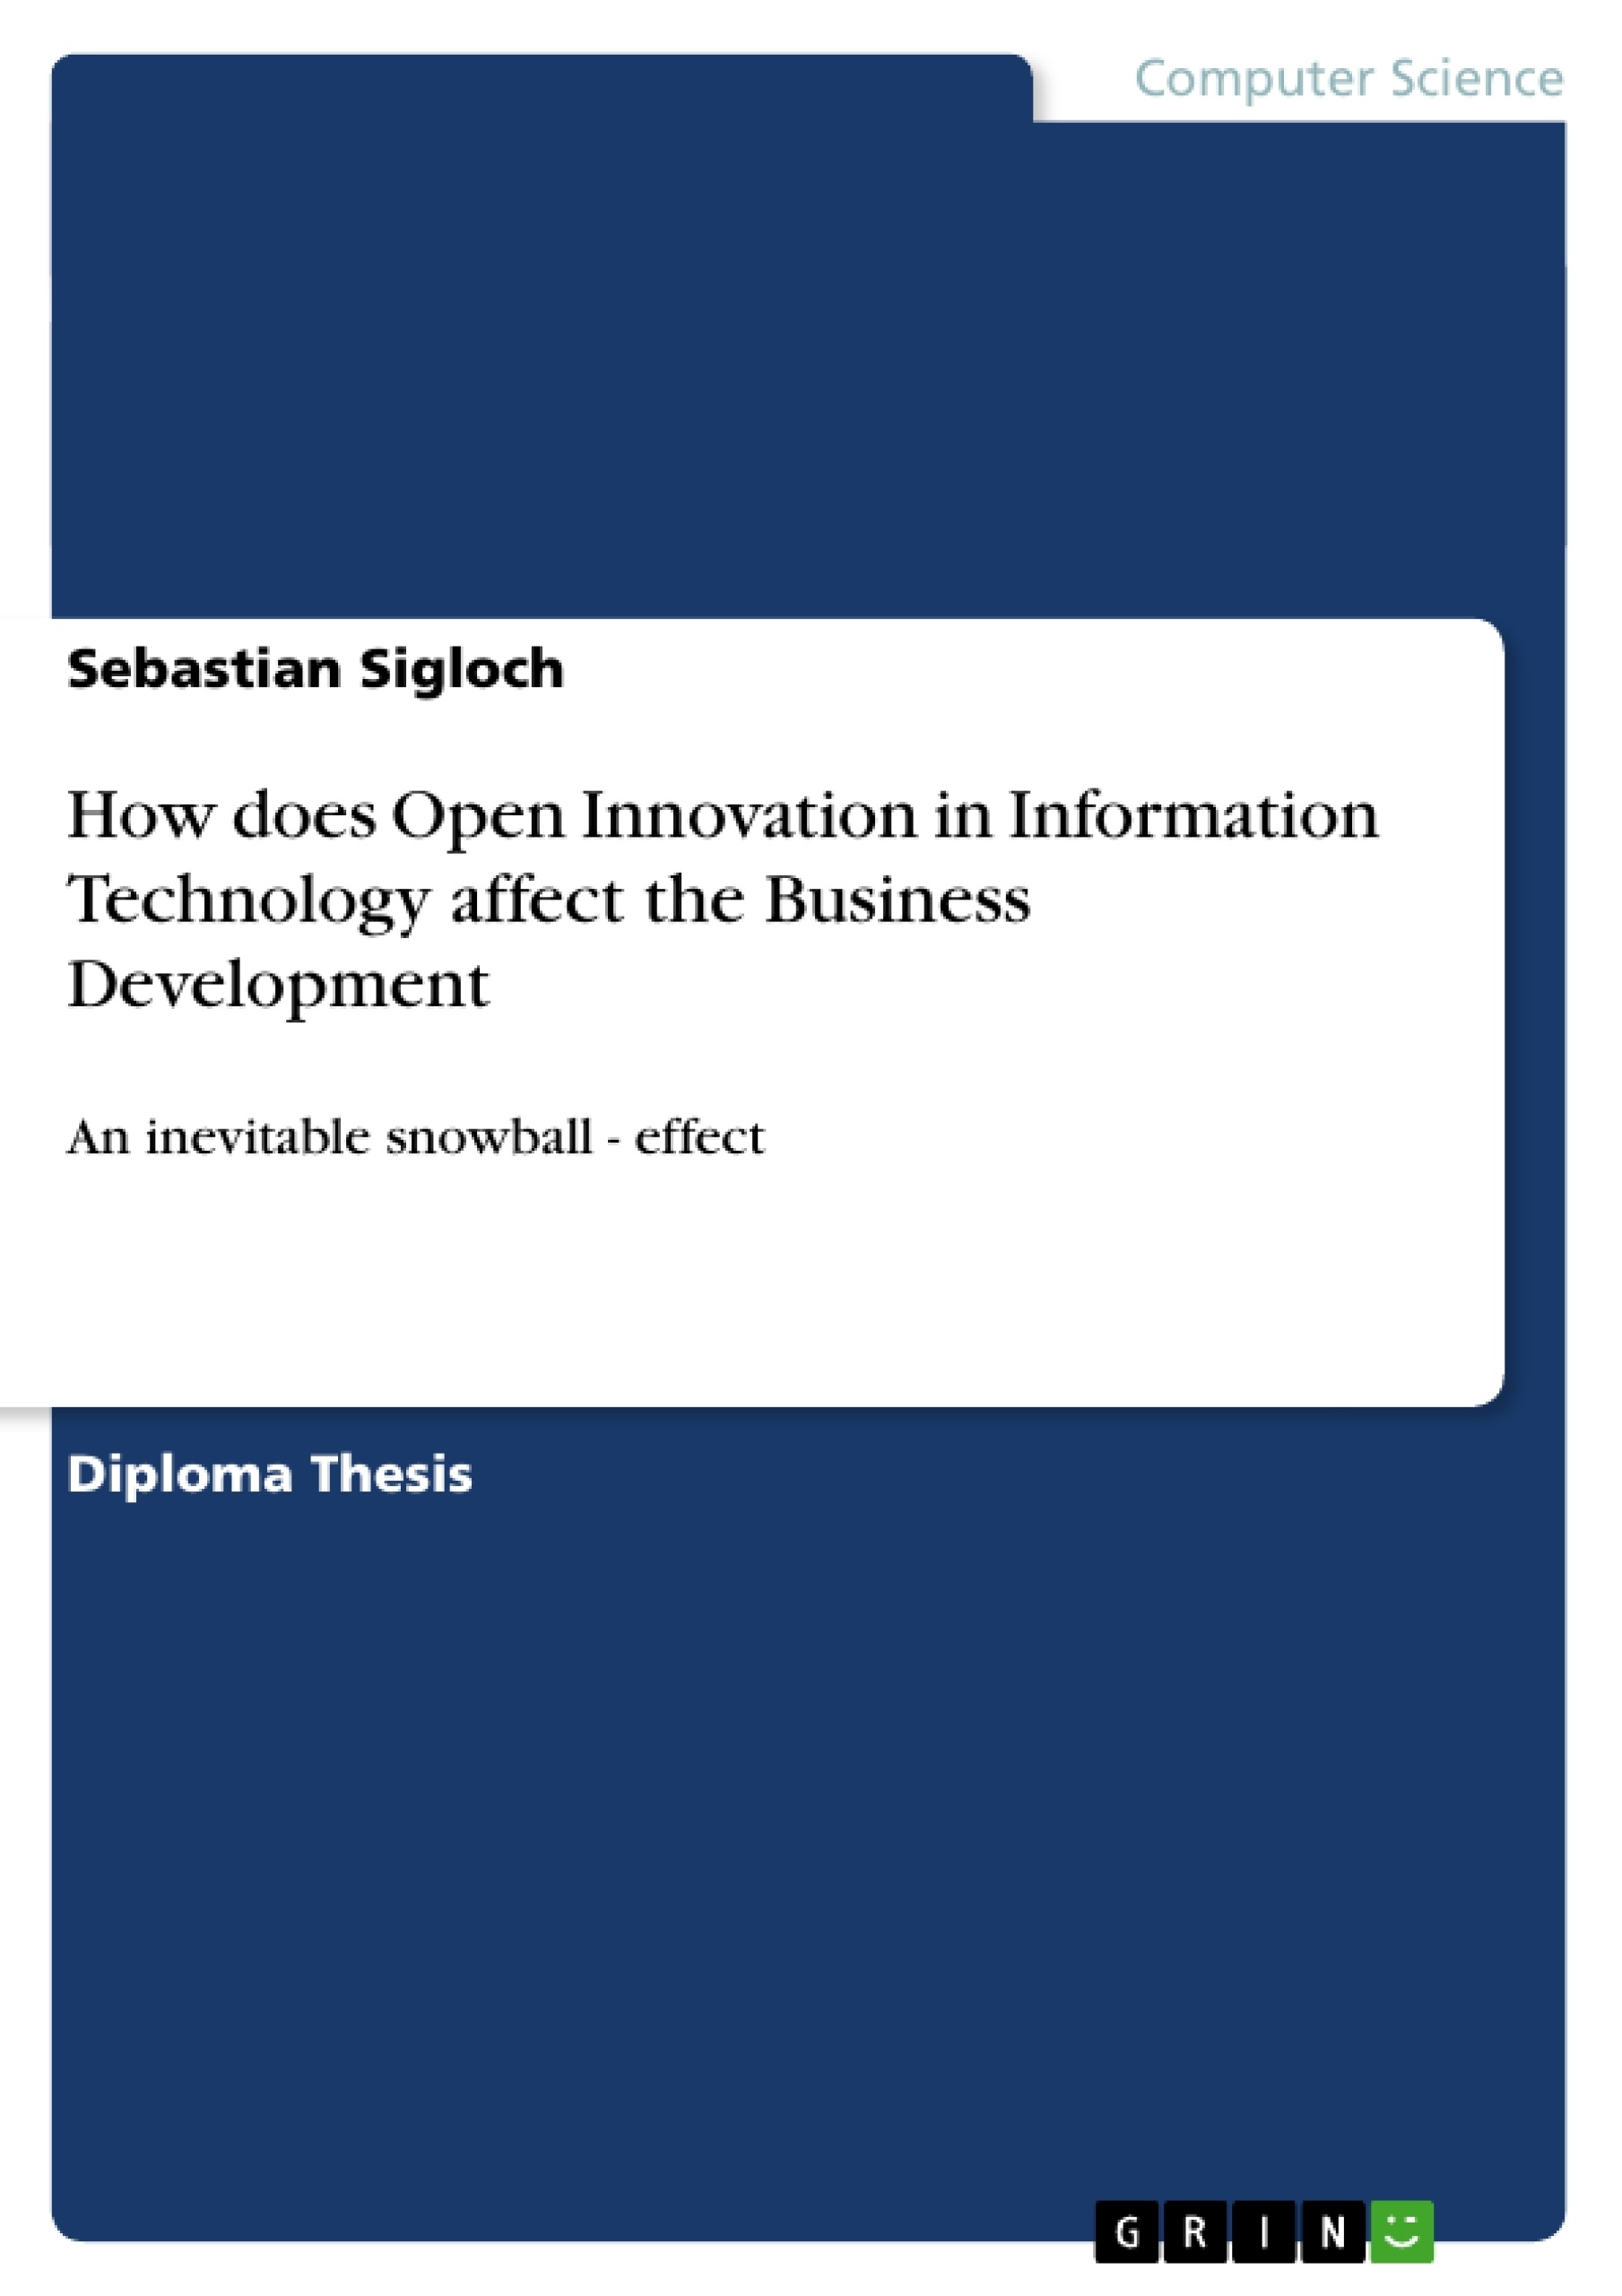 Title: How does Open Innovation in Information Technology affect the Business Development